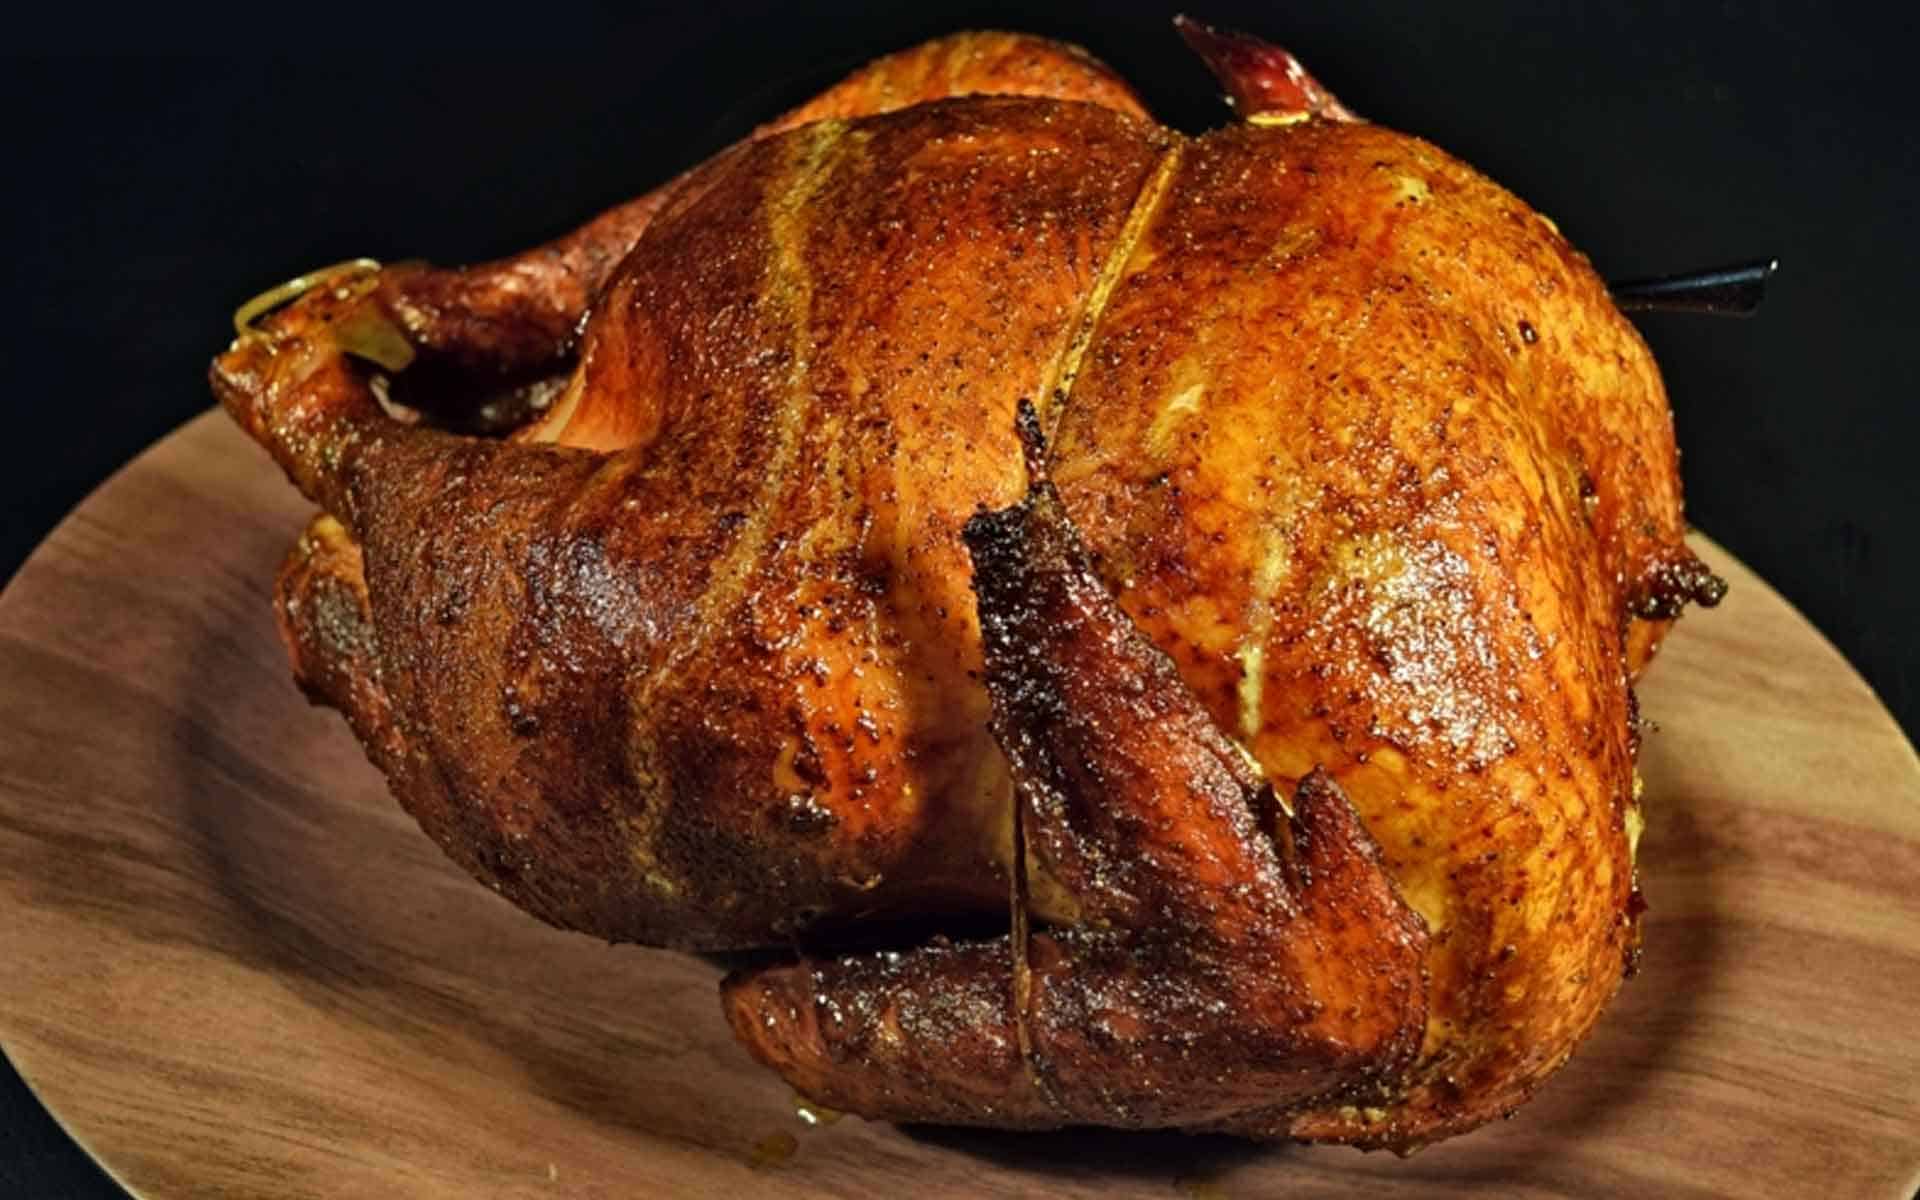 Smoked turkey is a great recipe idea for winter grilling